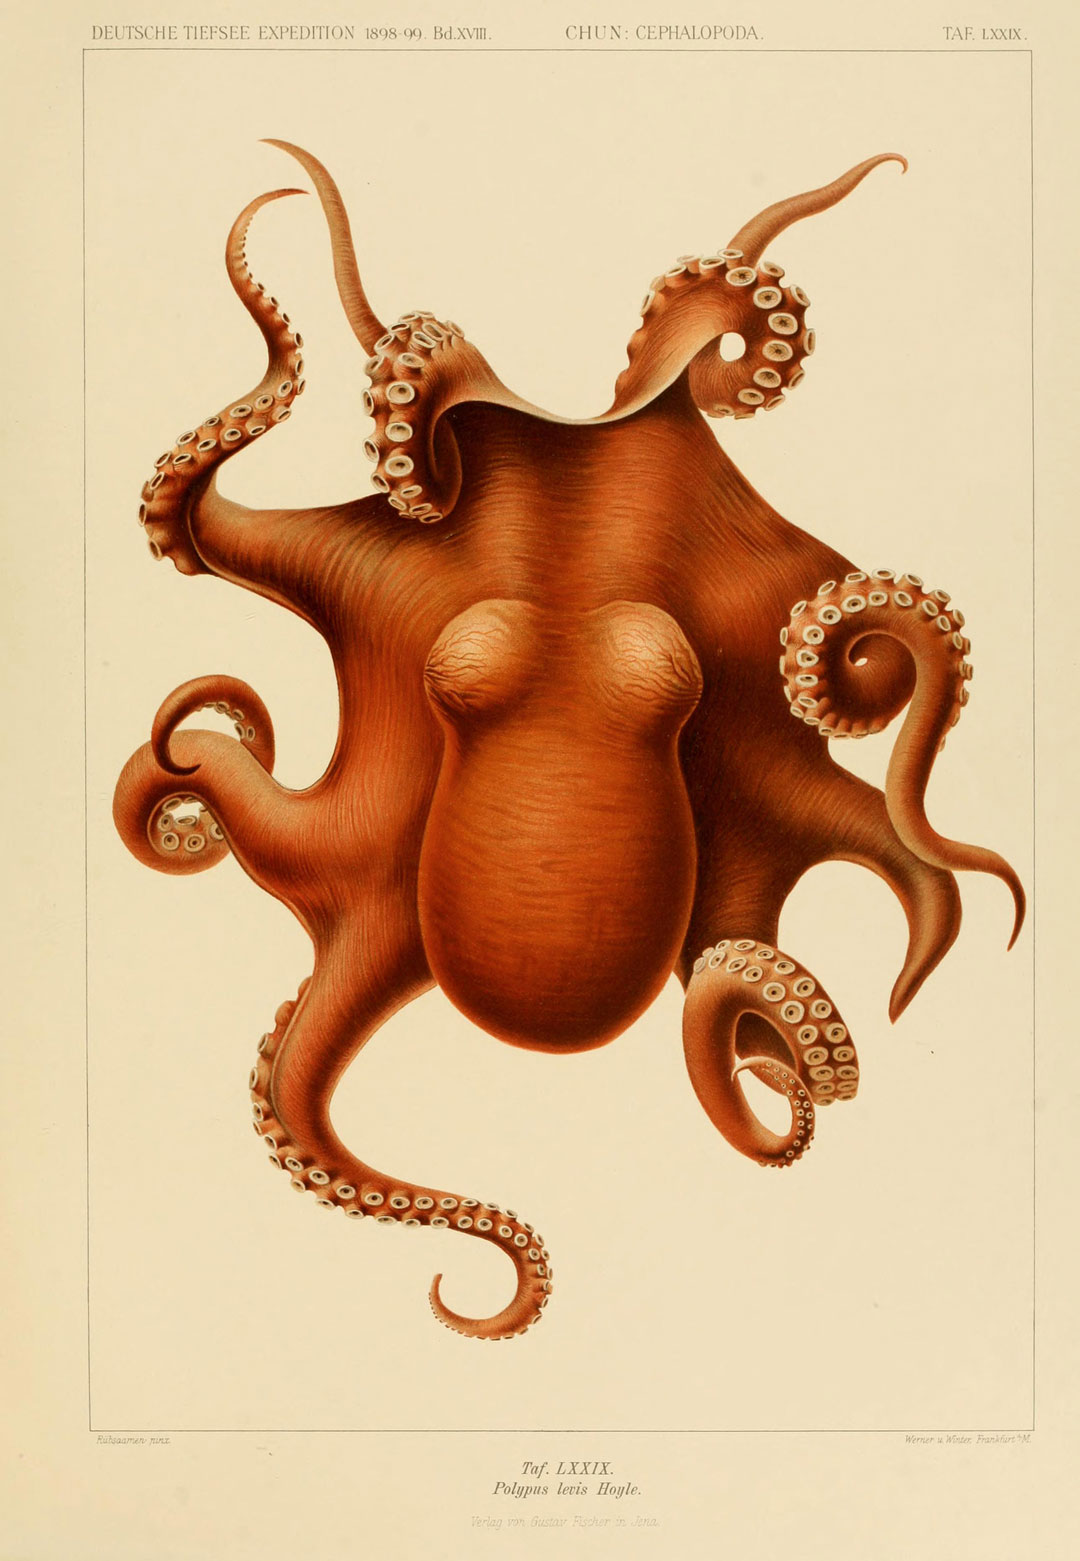 Polypus levis, from Die Cephalopoden, 1910–15 Printed by Carl Chun, as reproduced in Animal: Exploring the Zoological World